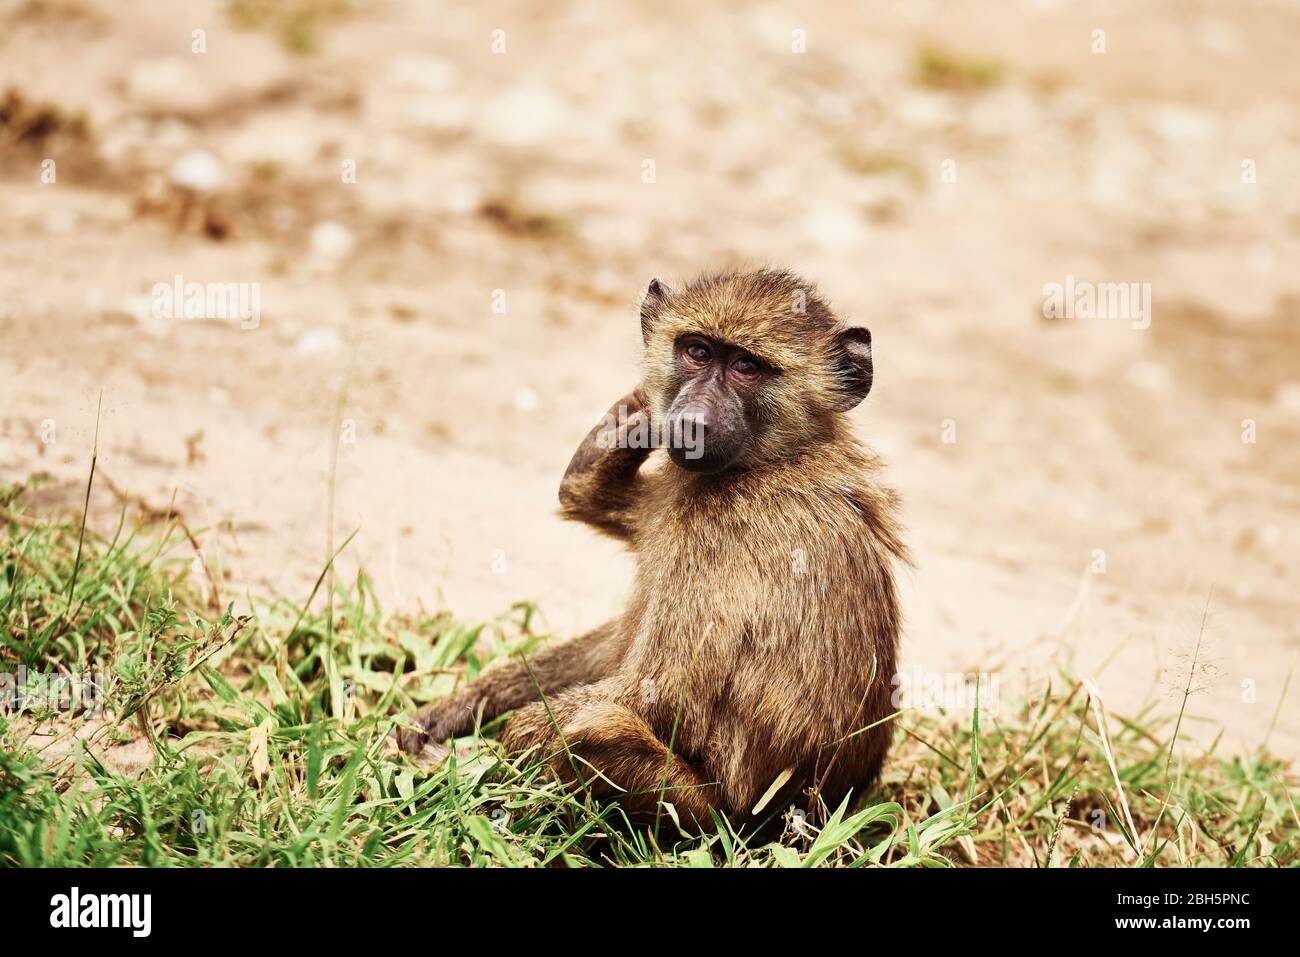 Portrait of small monkey sitting in grass Stock Photo